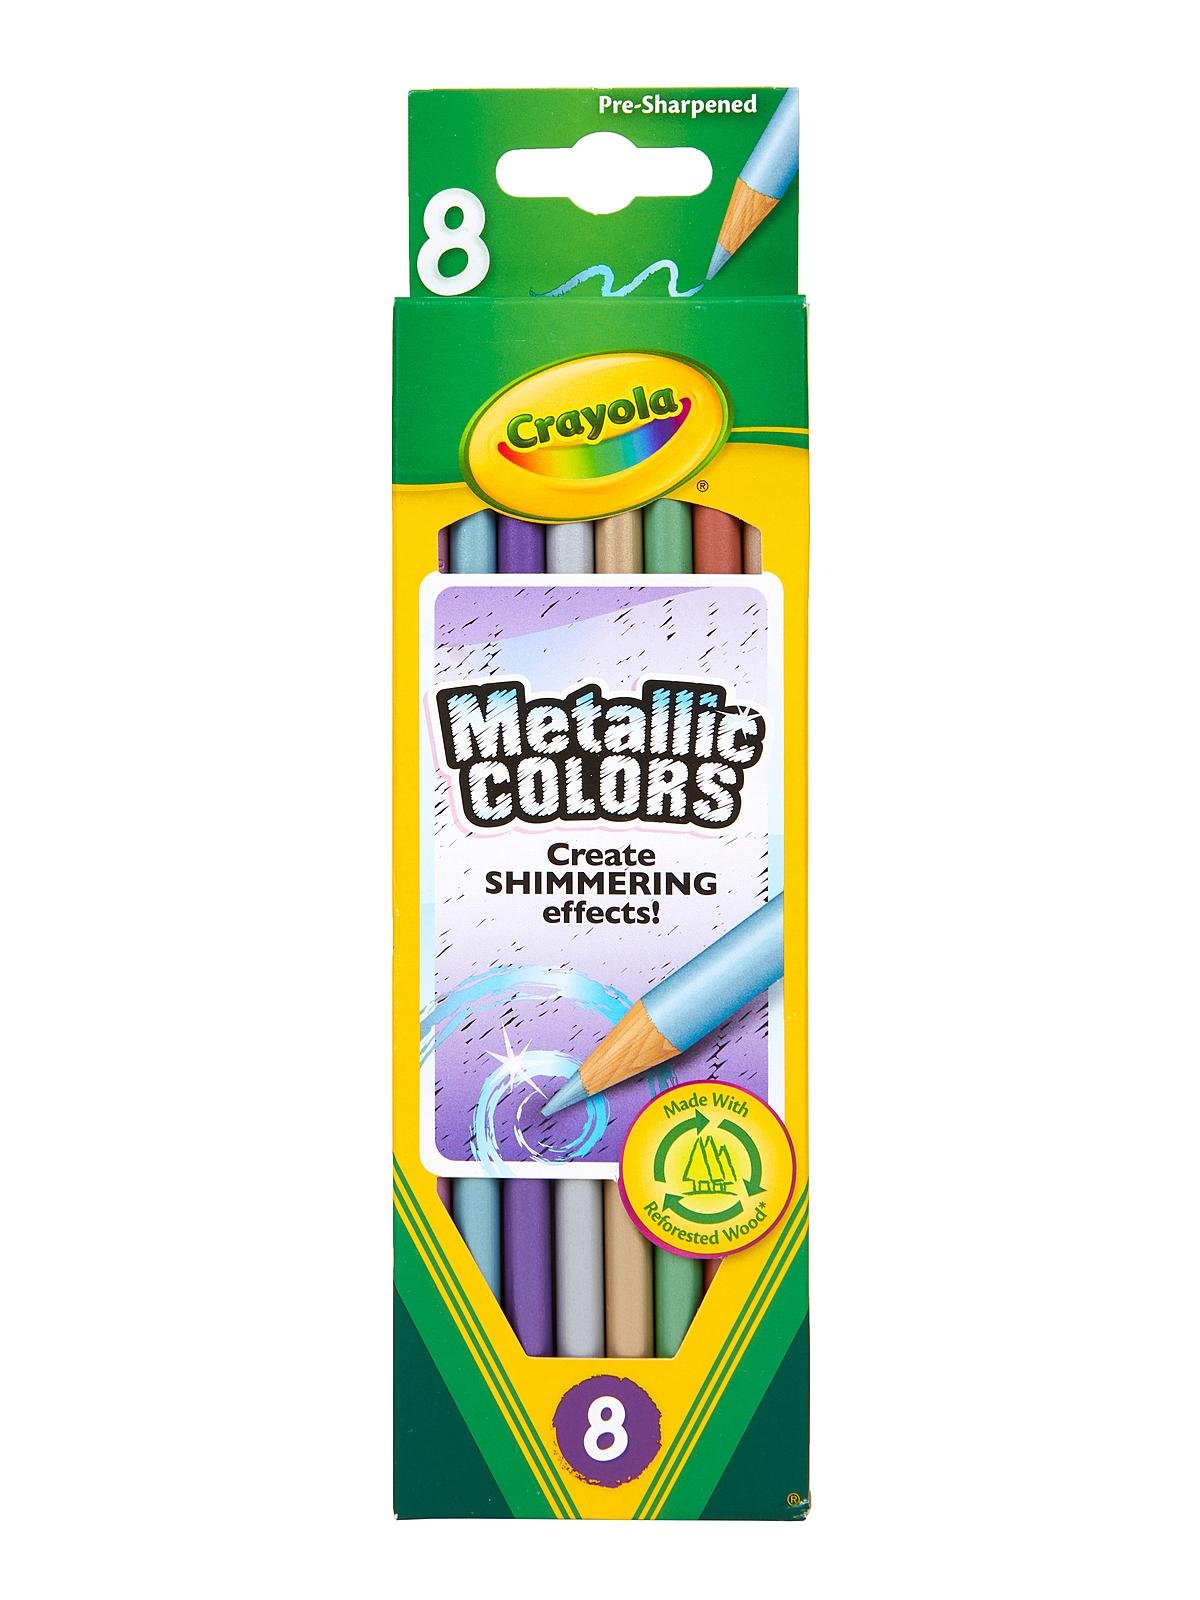 Crayola Colored Pencils, Assorted Colors, 50 Count, Gift Set 68-4050 NEW